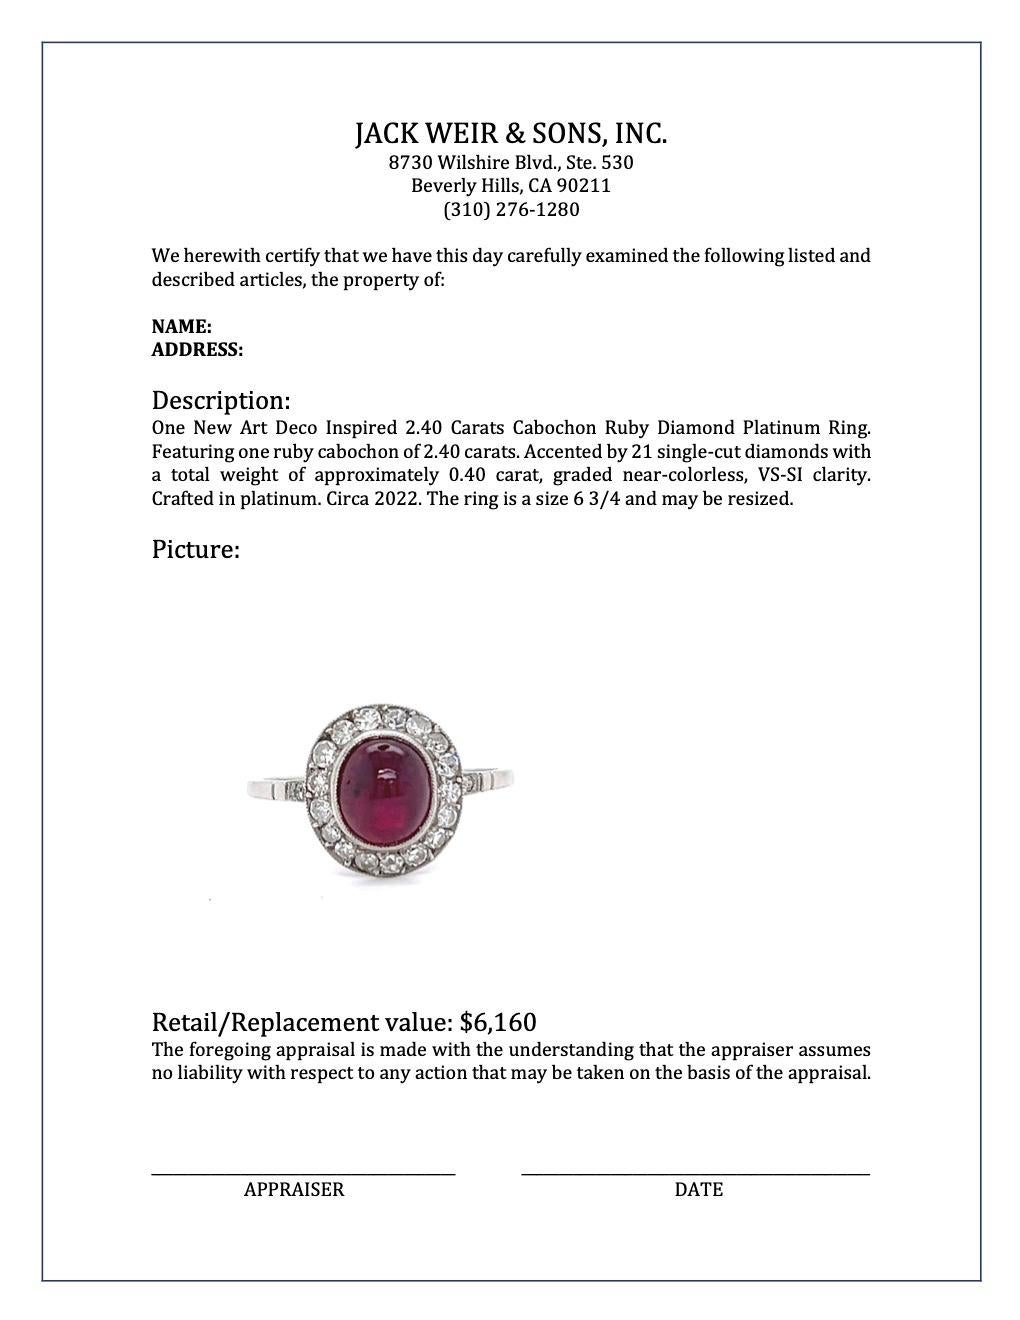 Art Deco Inspired 2.40 Carats Cabochon Ruby Diamond Platinum Ring For Sale 3